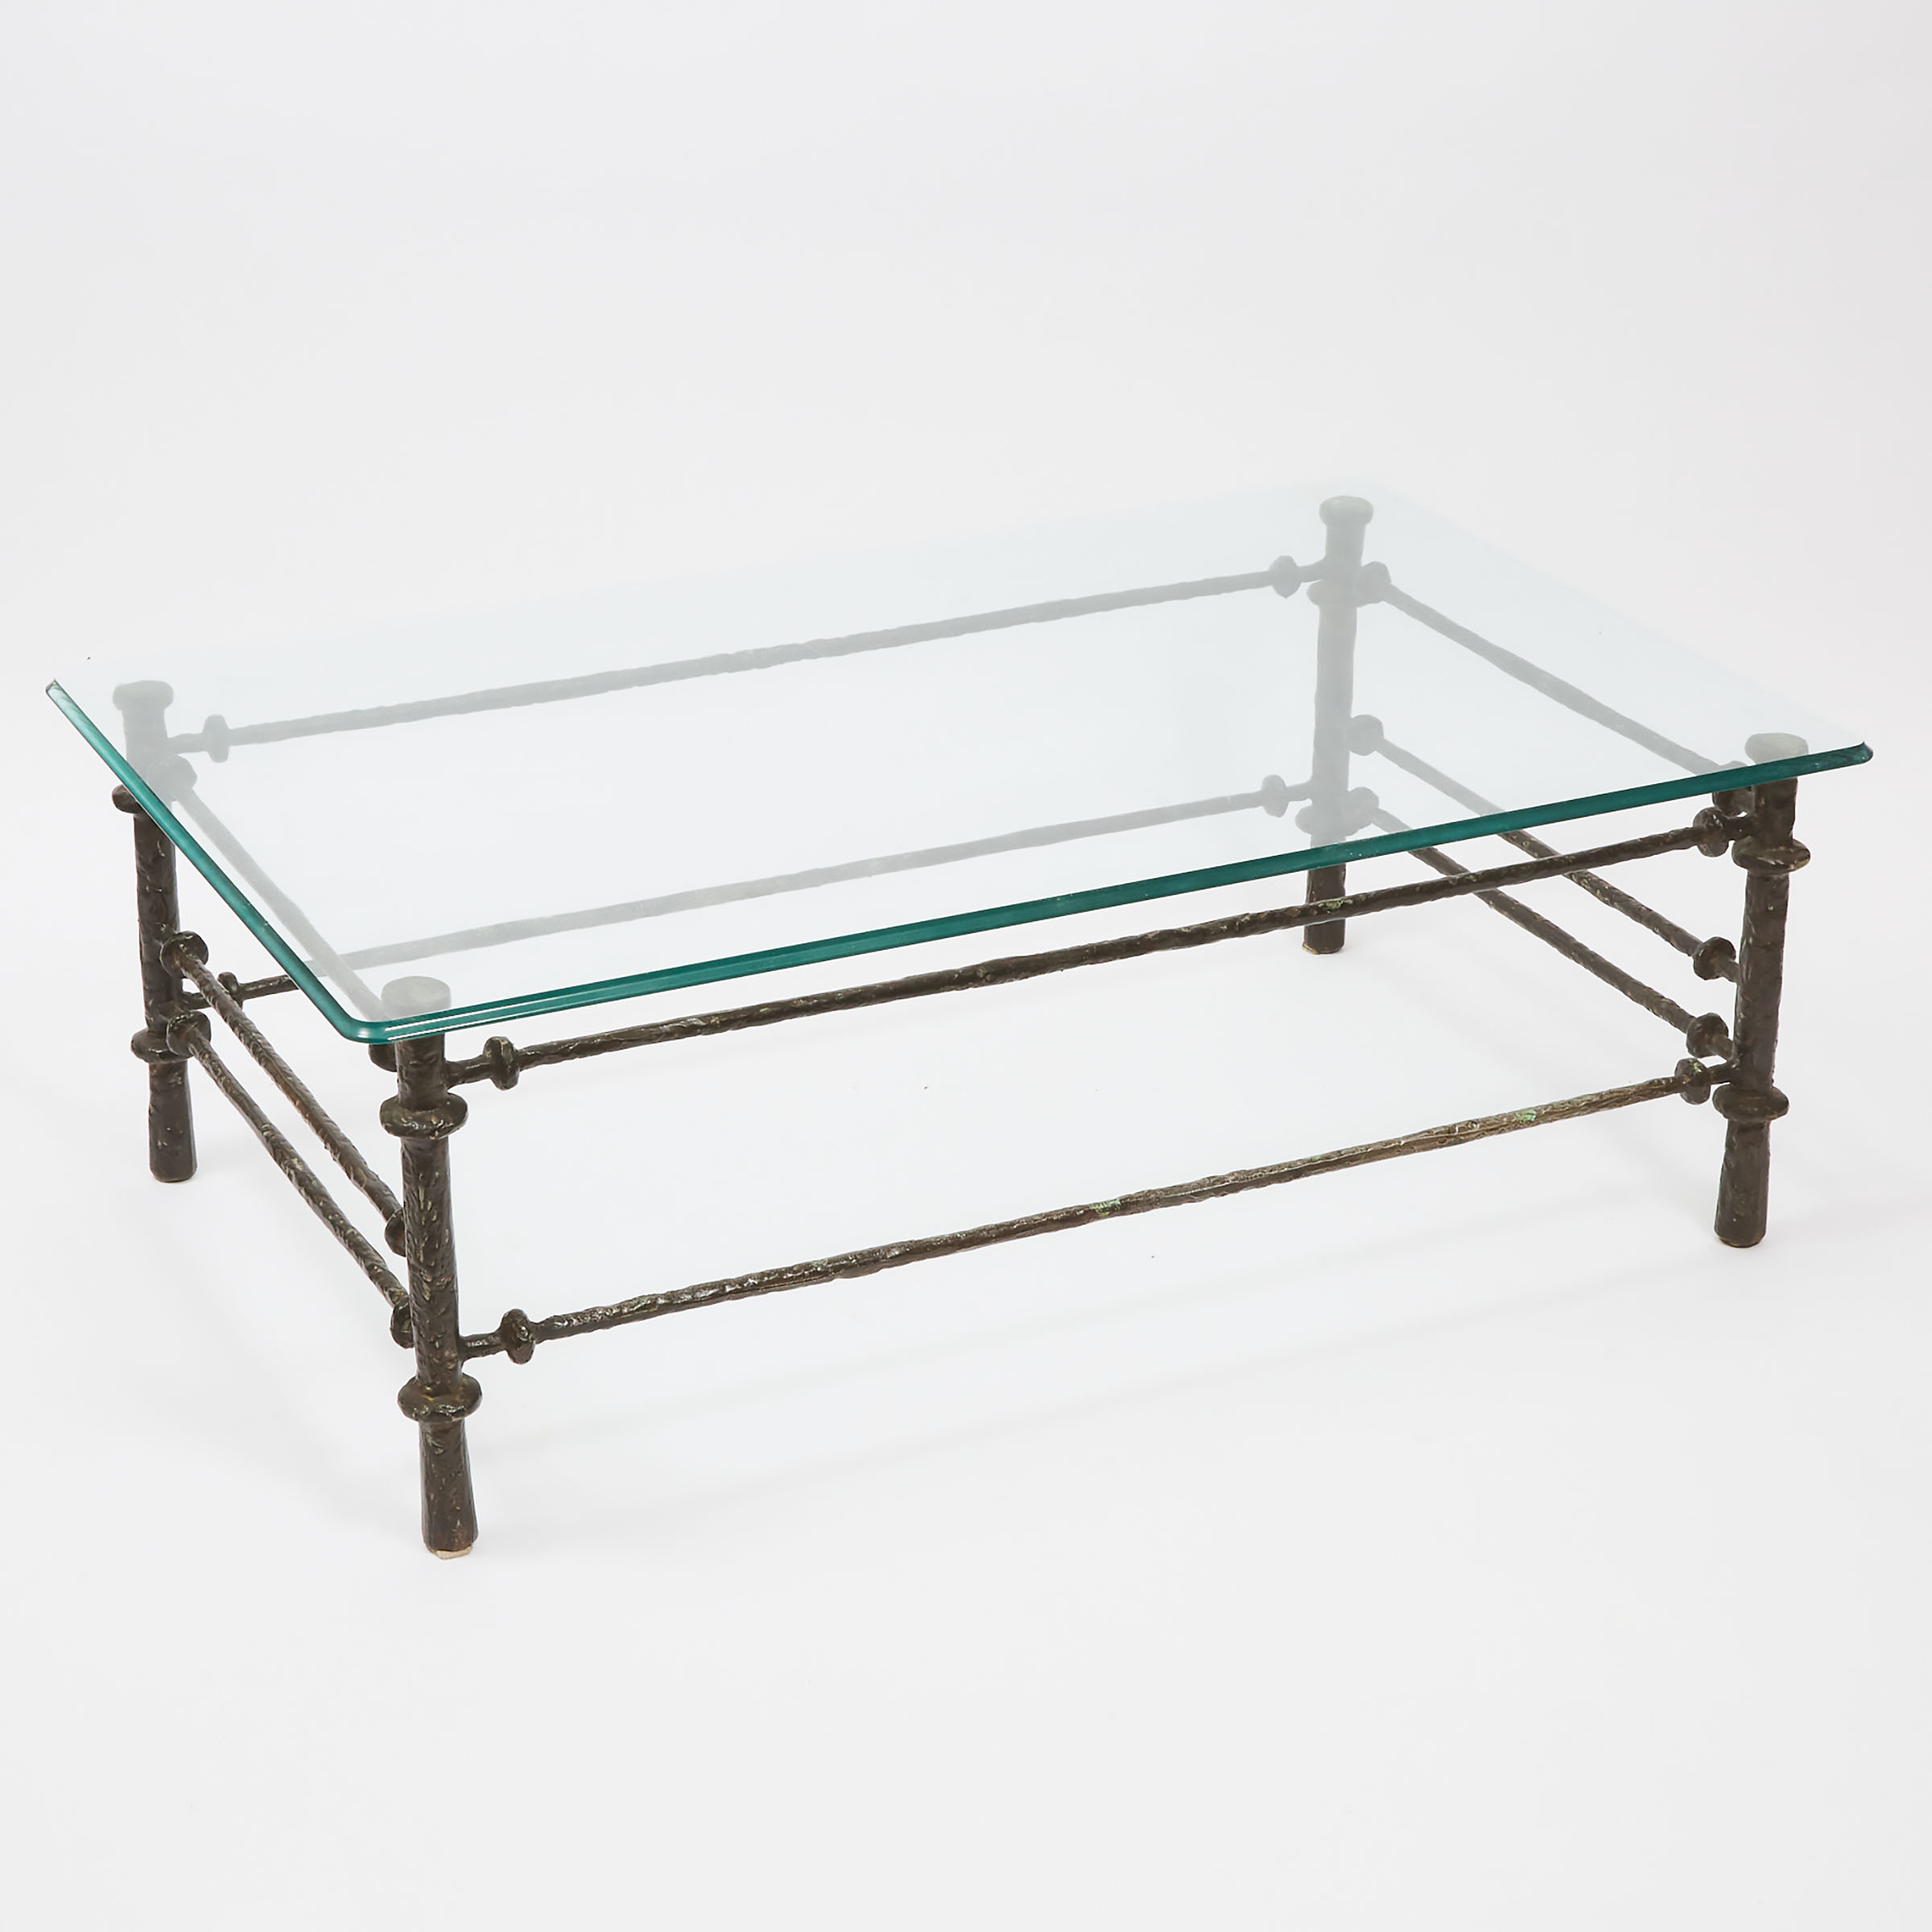 Contemporary Patinated Metal Coffee Table in the Manner of Diego Giacometti (1902-1985), c.1970